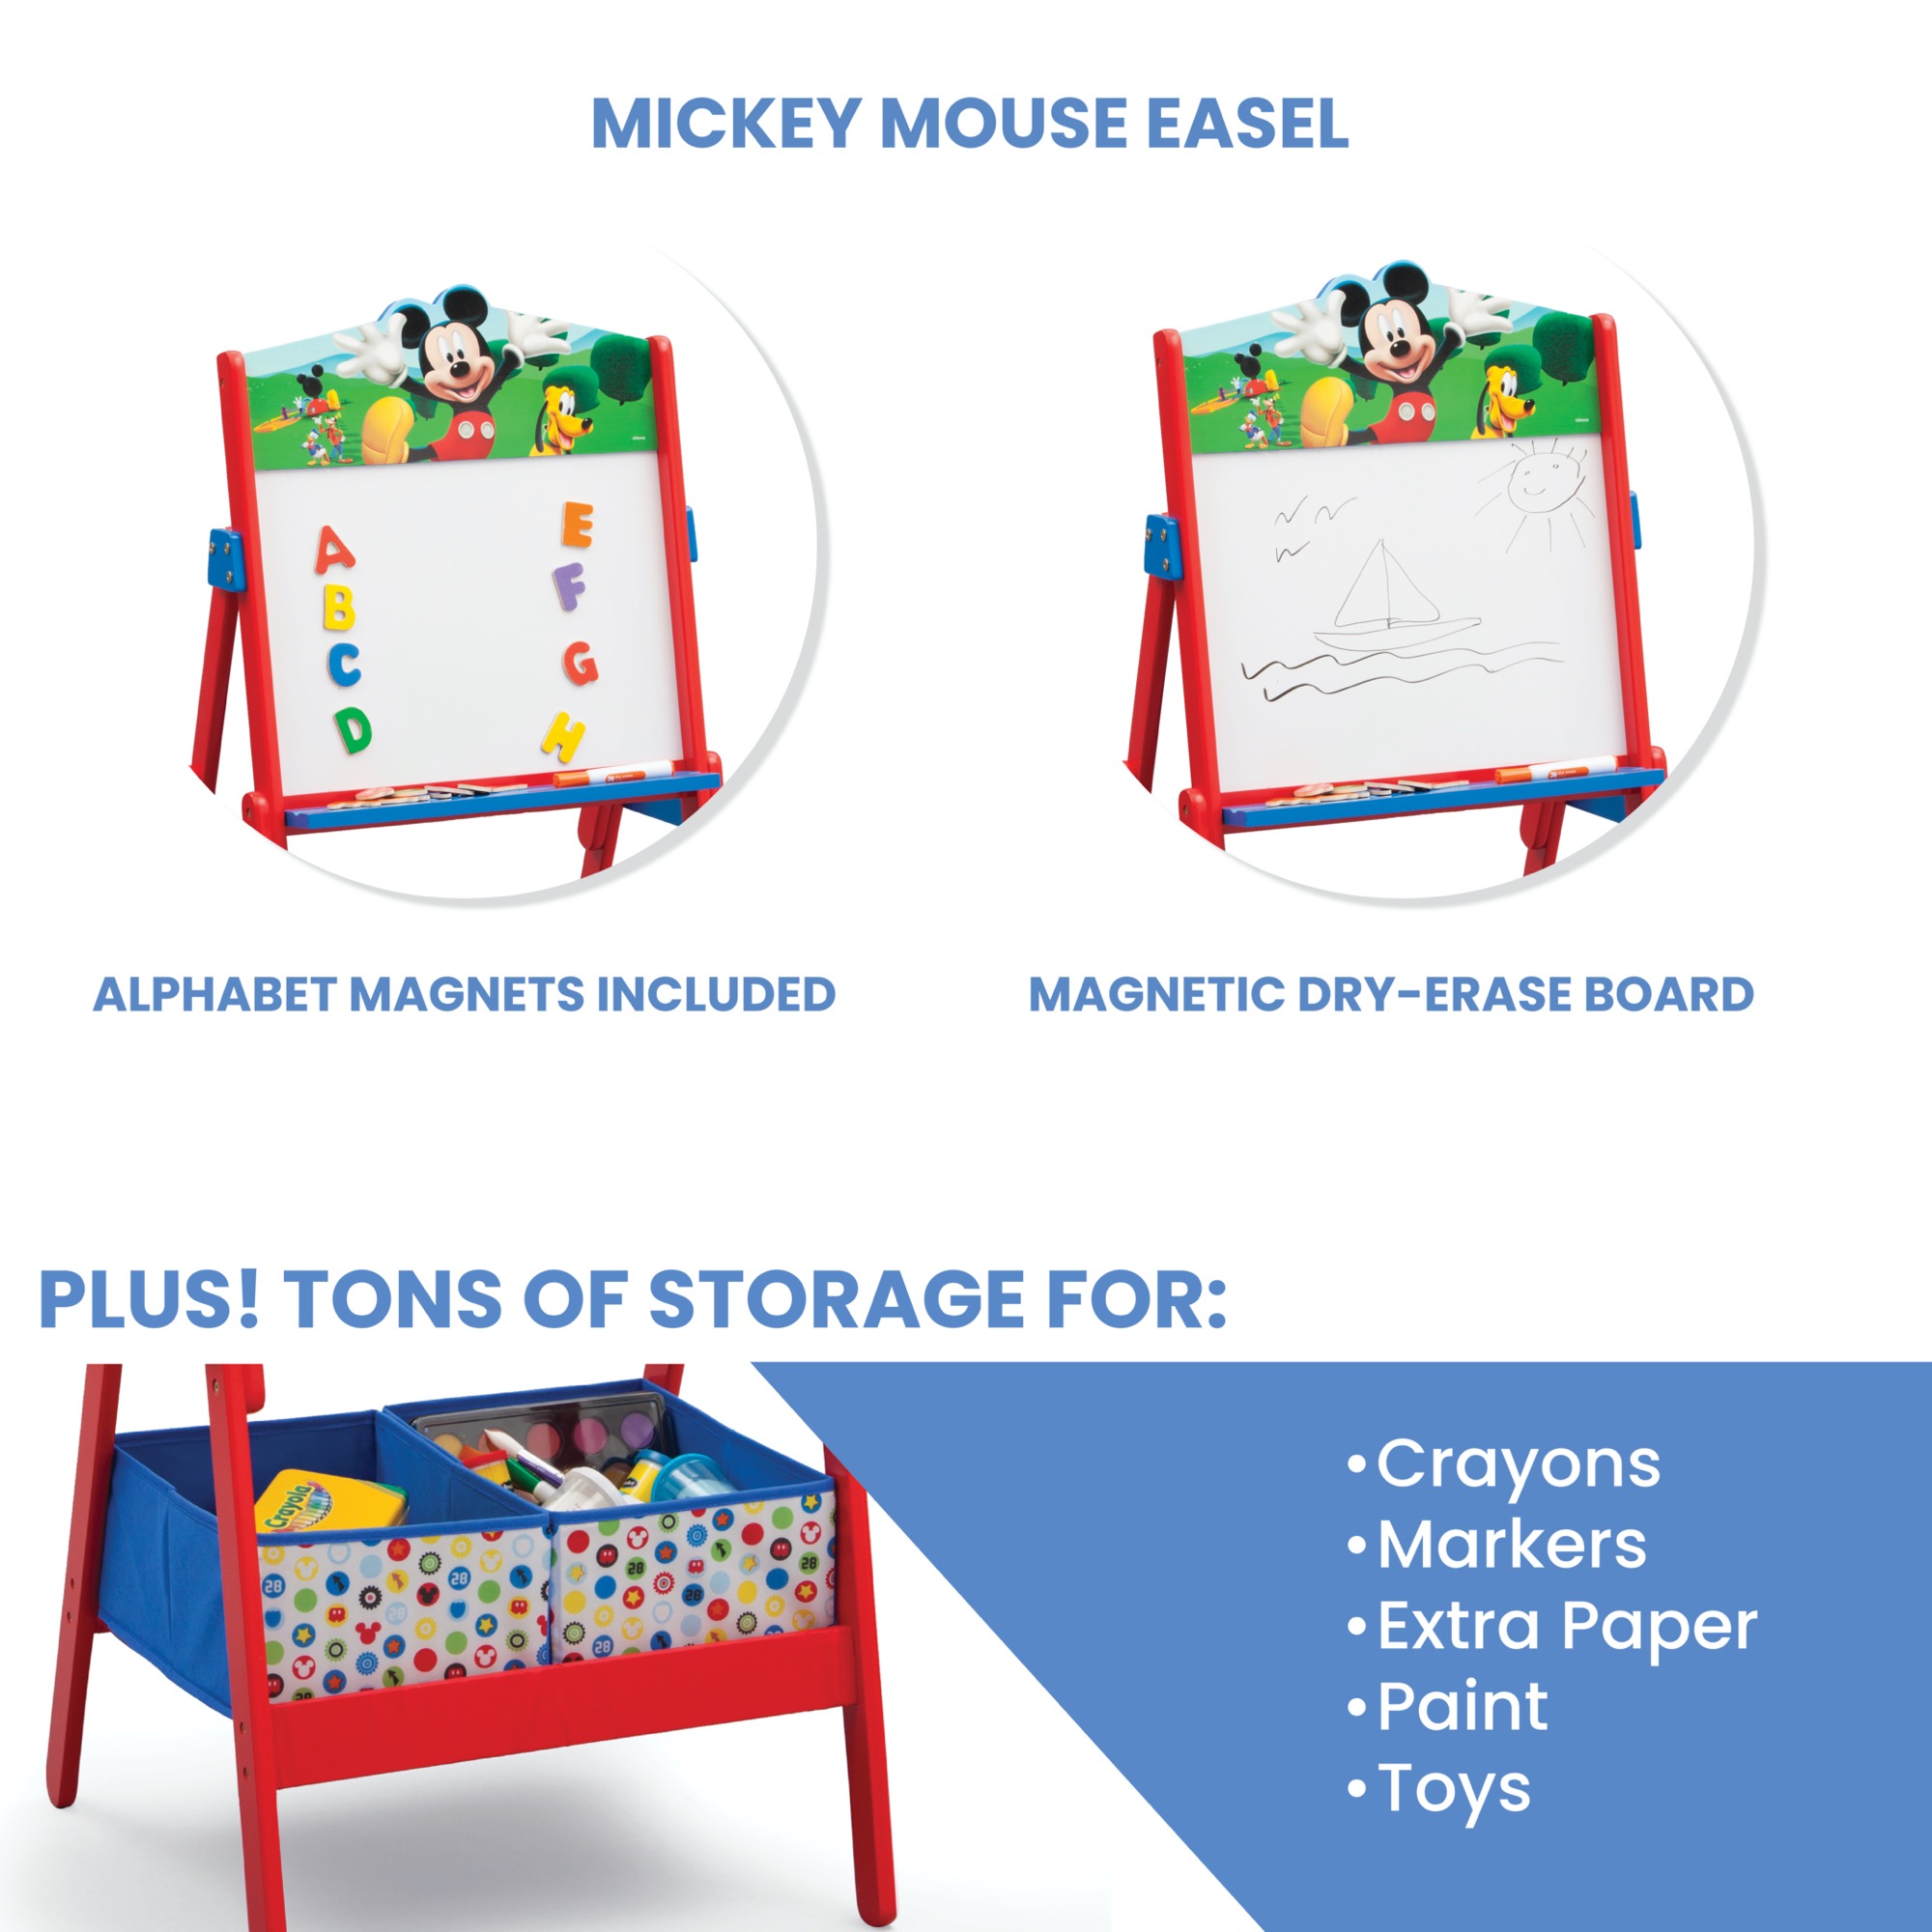 Disney Mickey Mouse Activity Easel with Storage by Delta Children, Greenguard Gold Certified - image 5 of 7